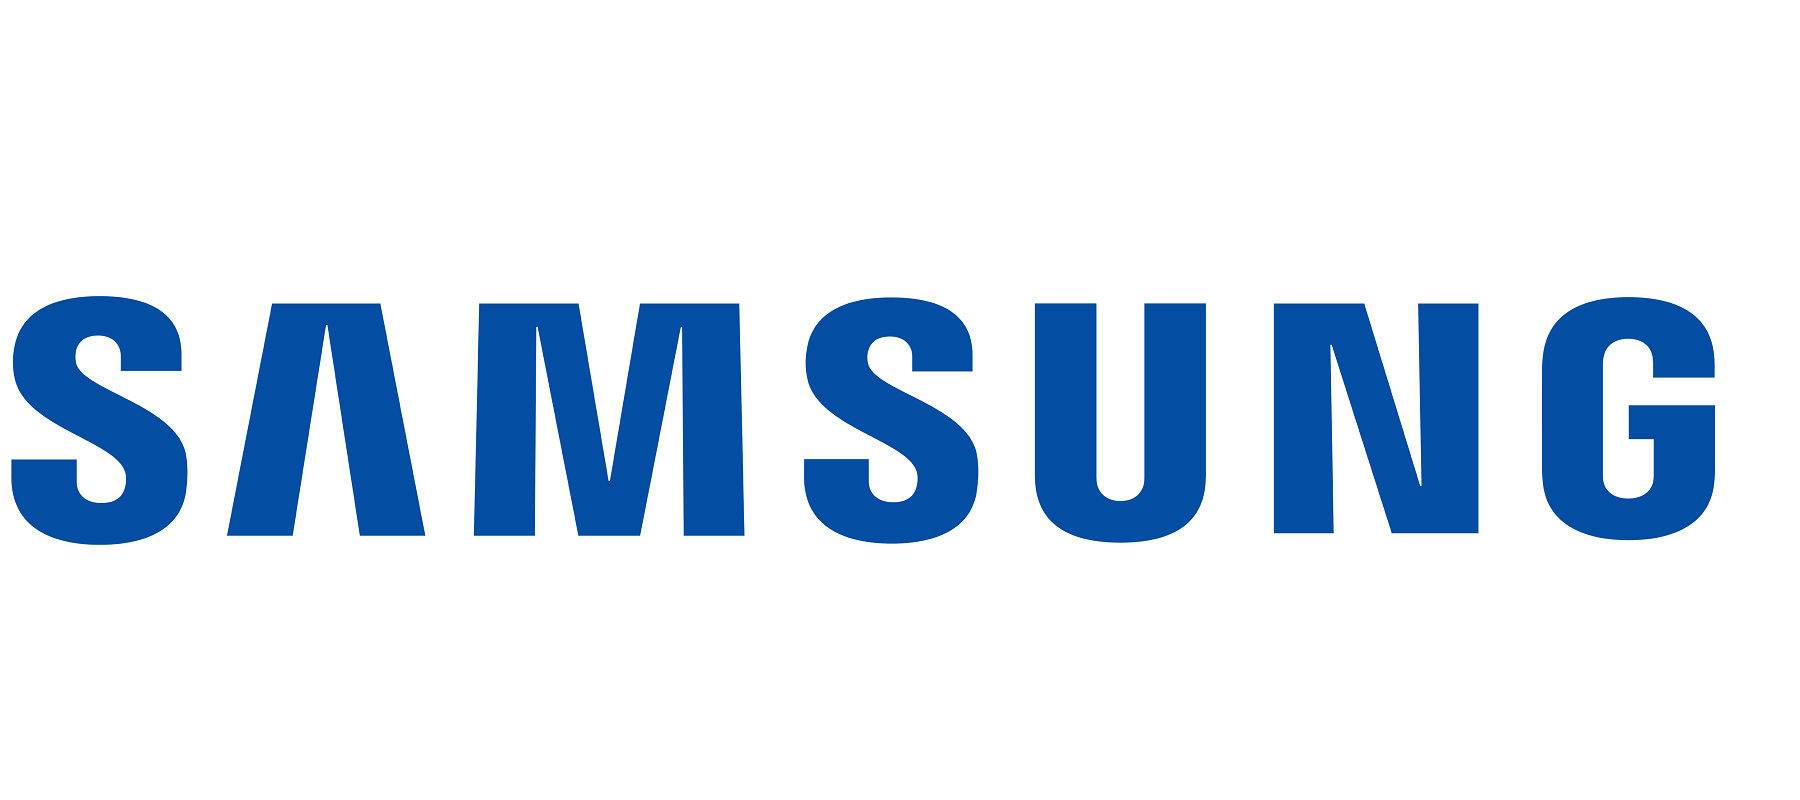 Samsung appliances obtain product carbon footprint certification by the Carbon Trust